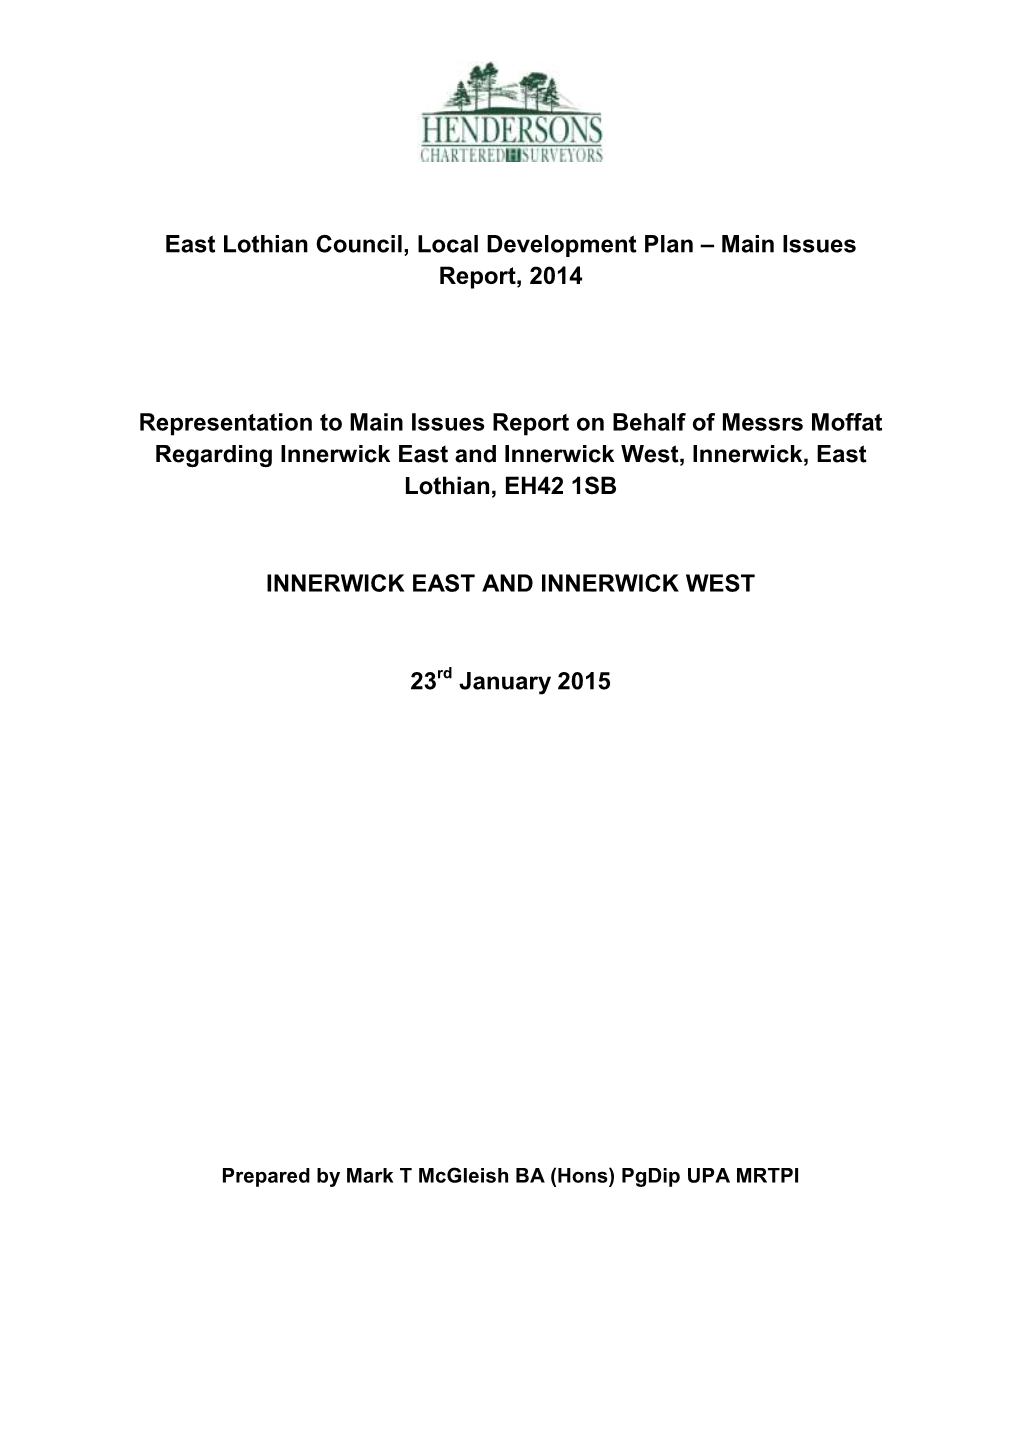 East Lothian Council, Local Development Plan – Main Issues Report, 2014